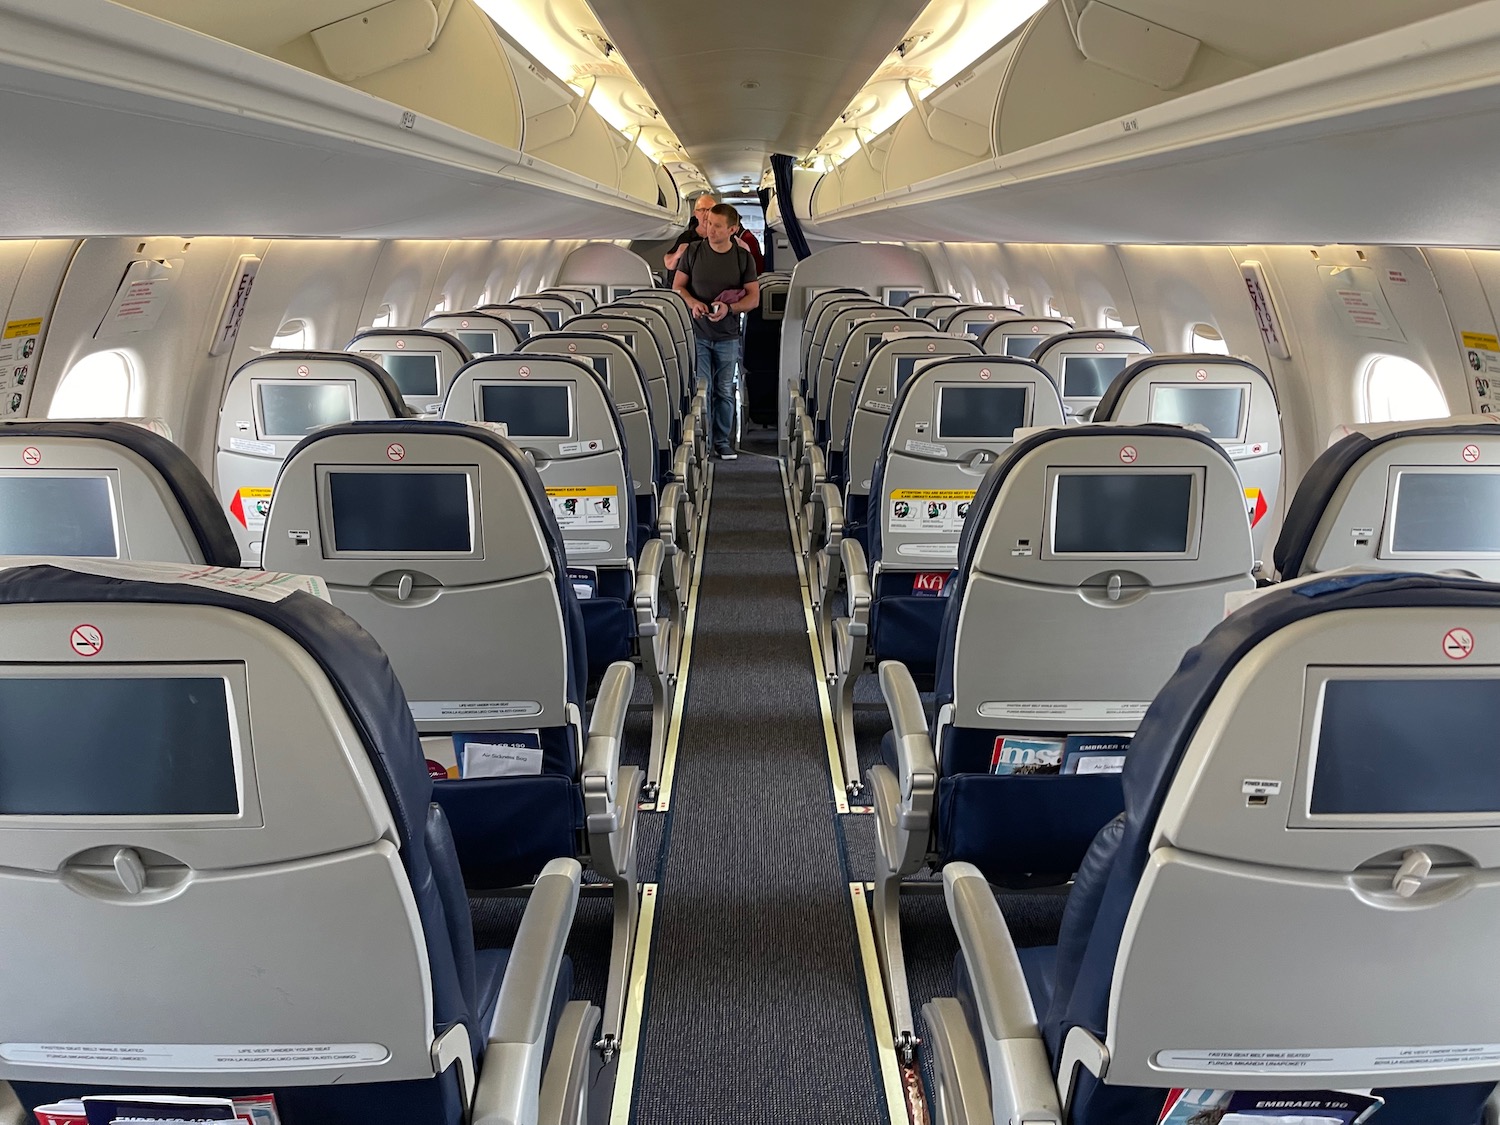 a person standing in the middle of an airplane